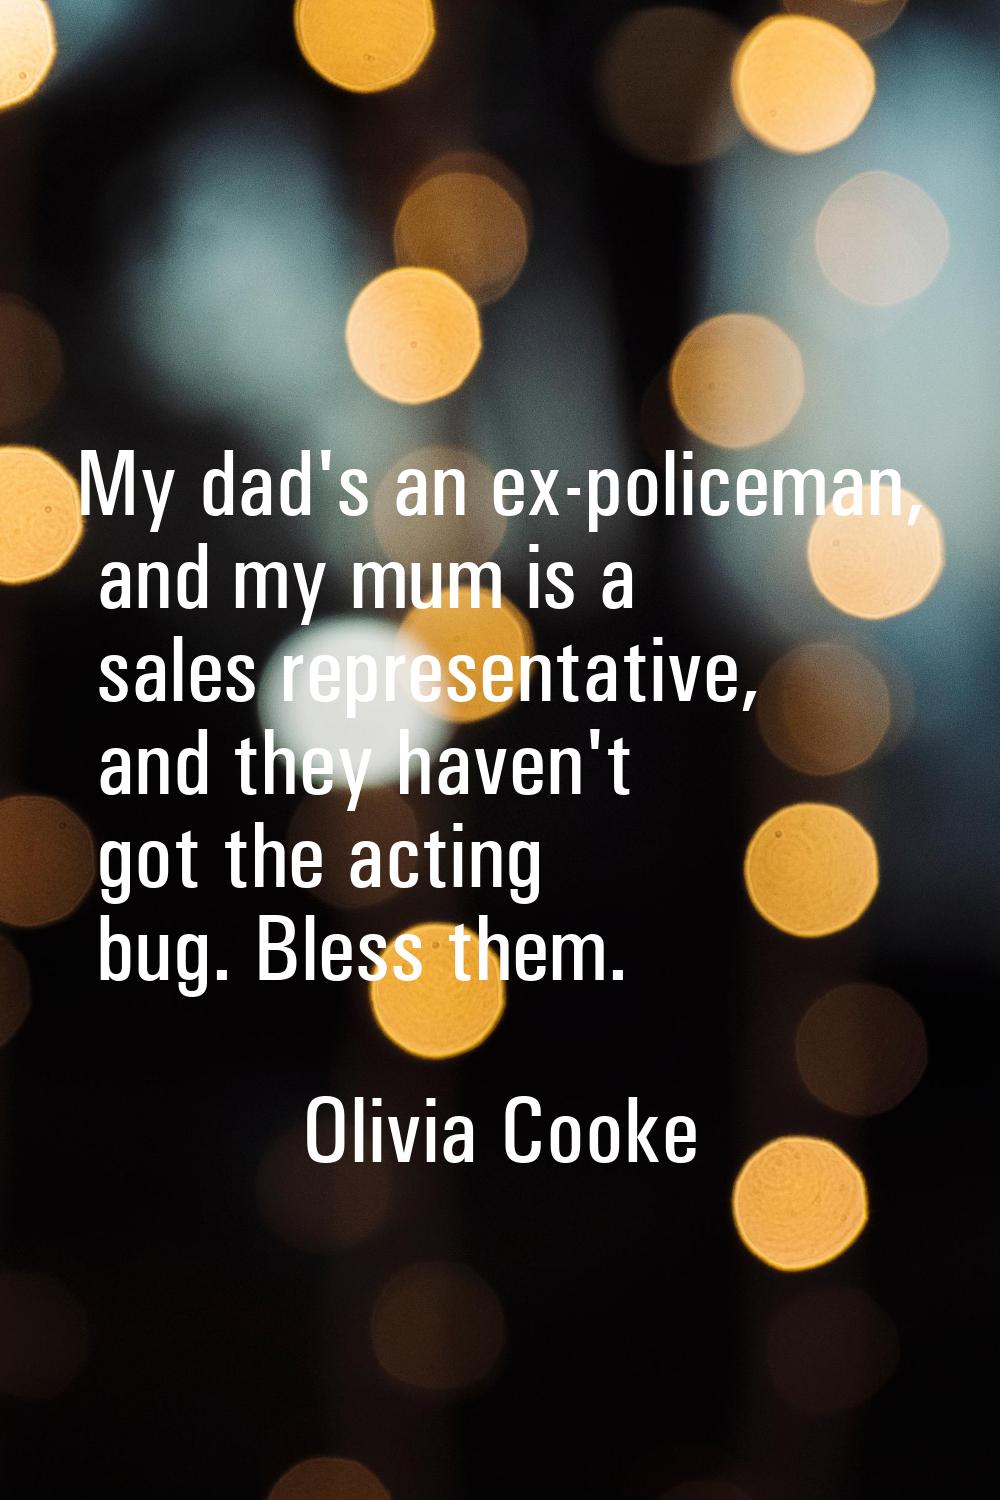 My dad's an ex-policeman, and my mum is a sales representative, and they haven't got the acting bug